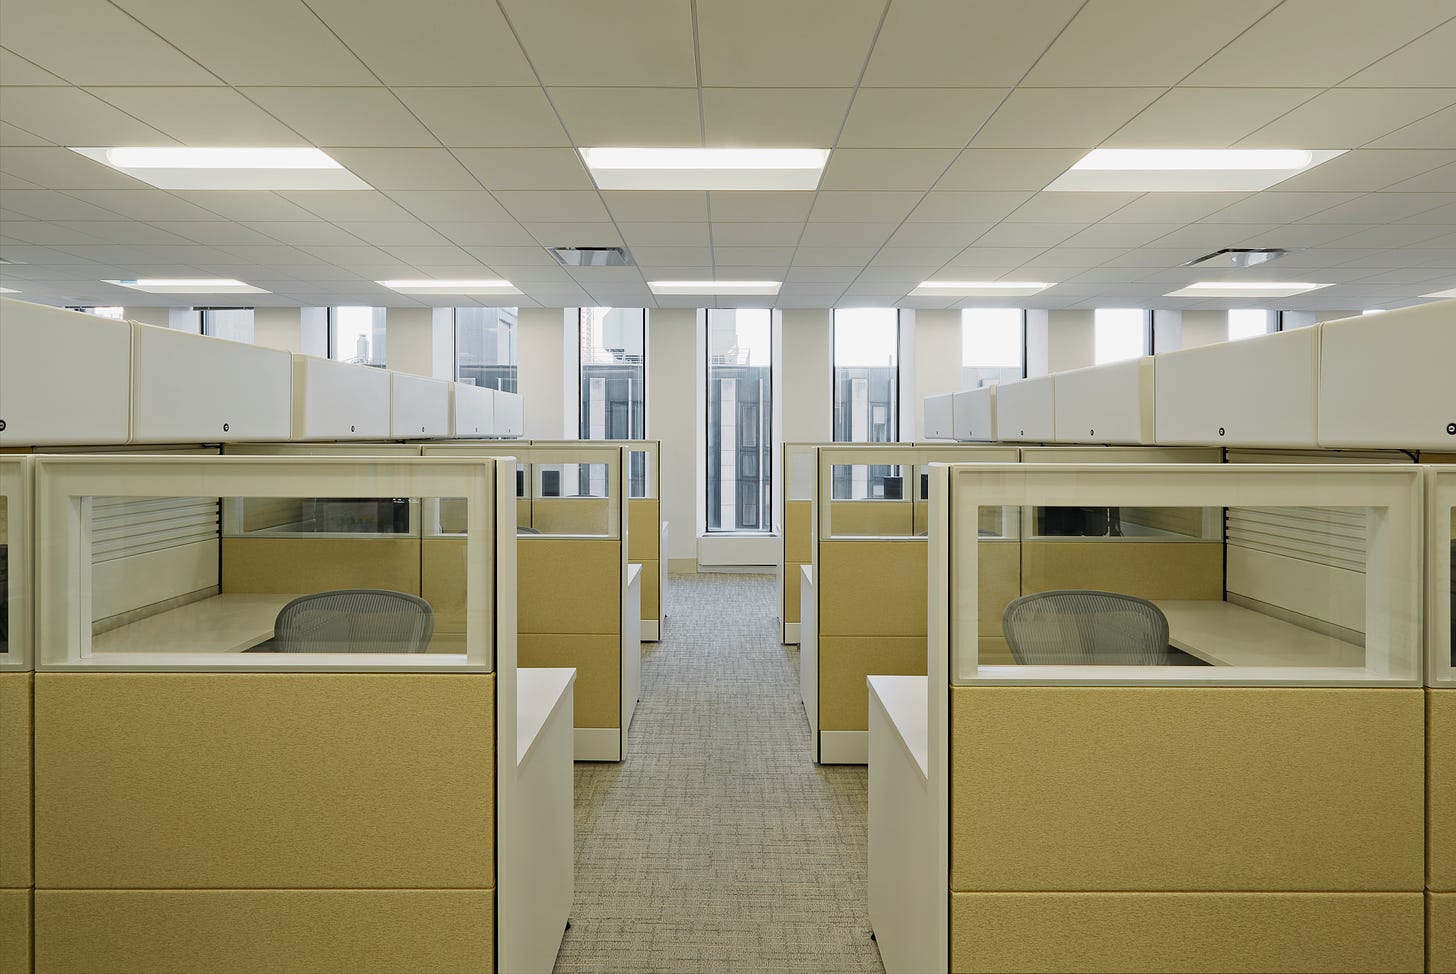 Spare array of office cubicles under florescent light